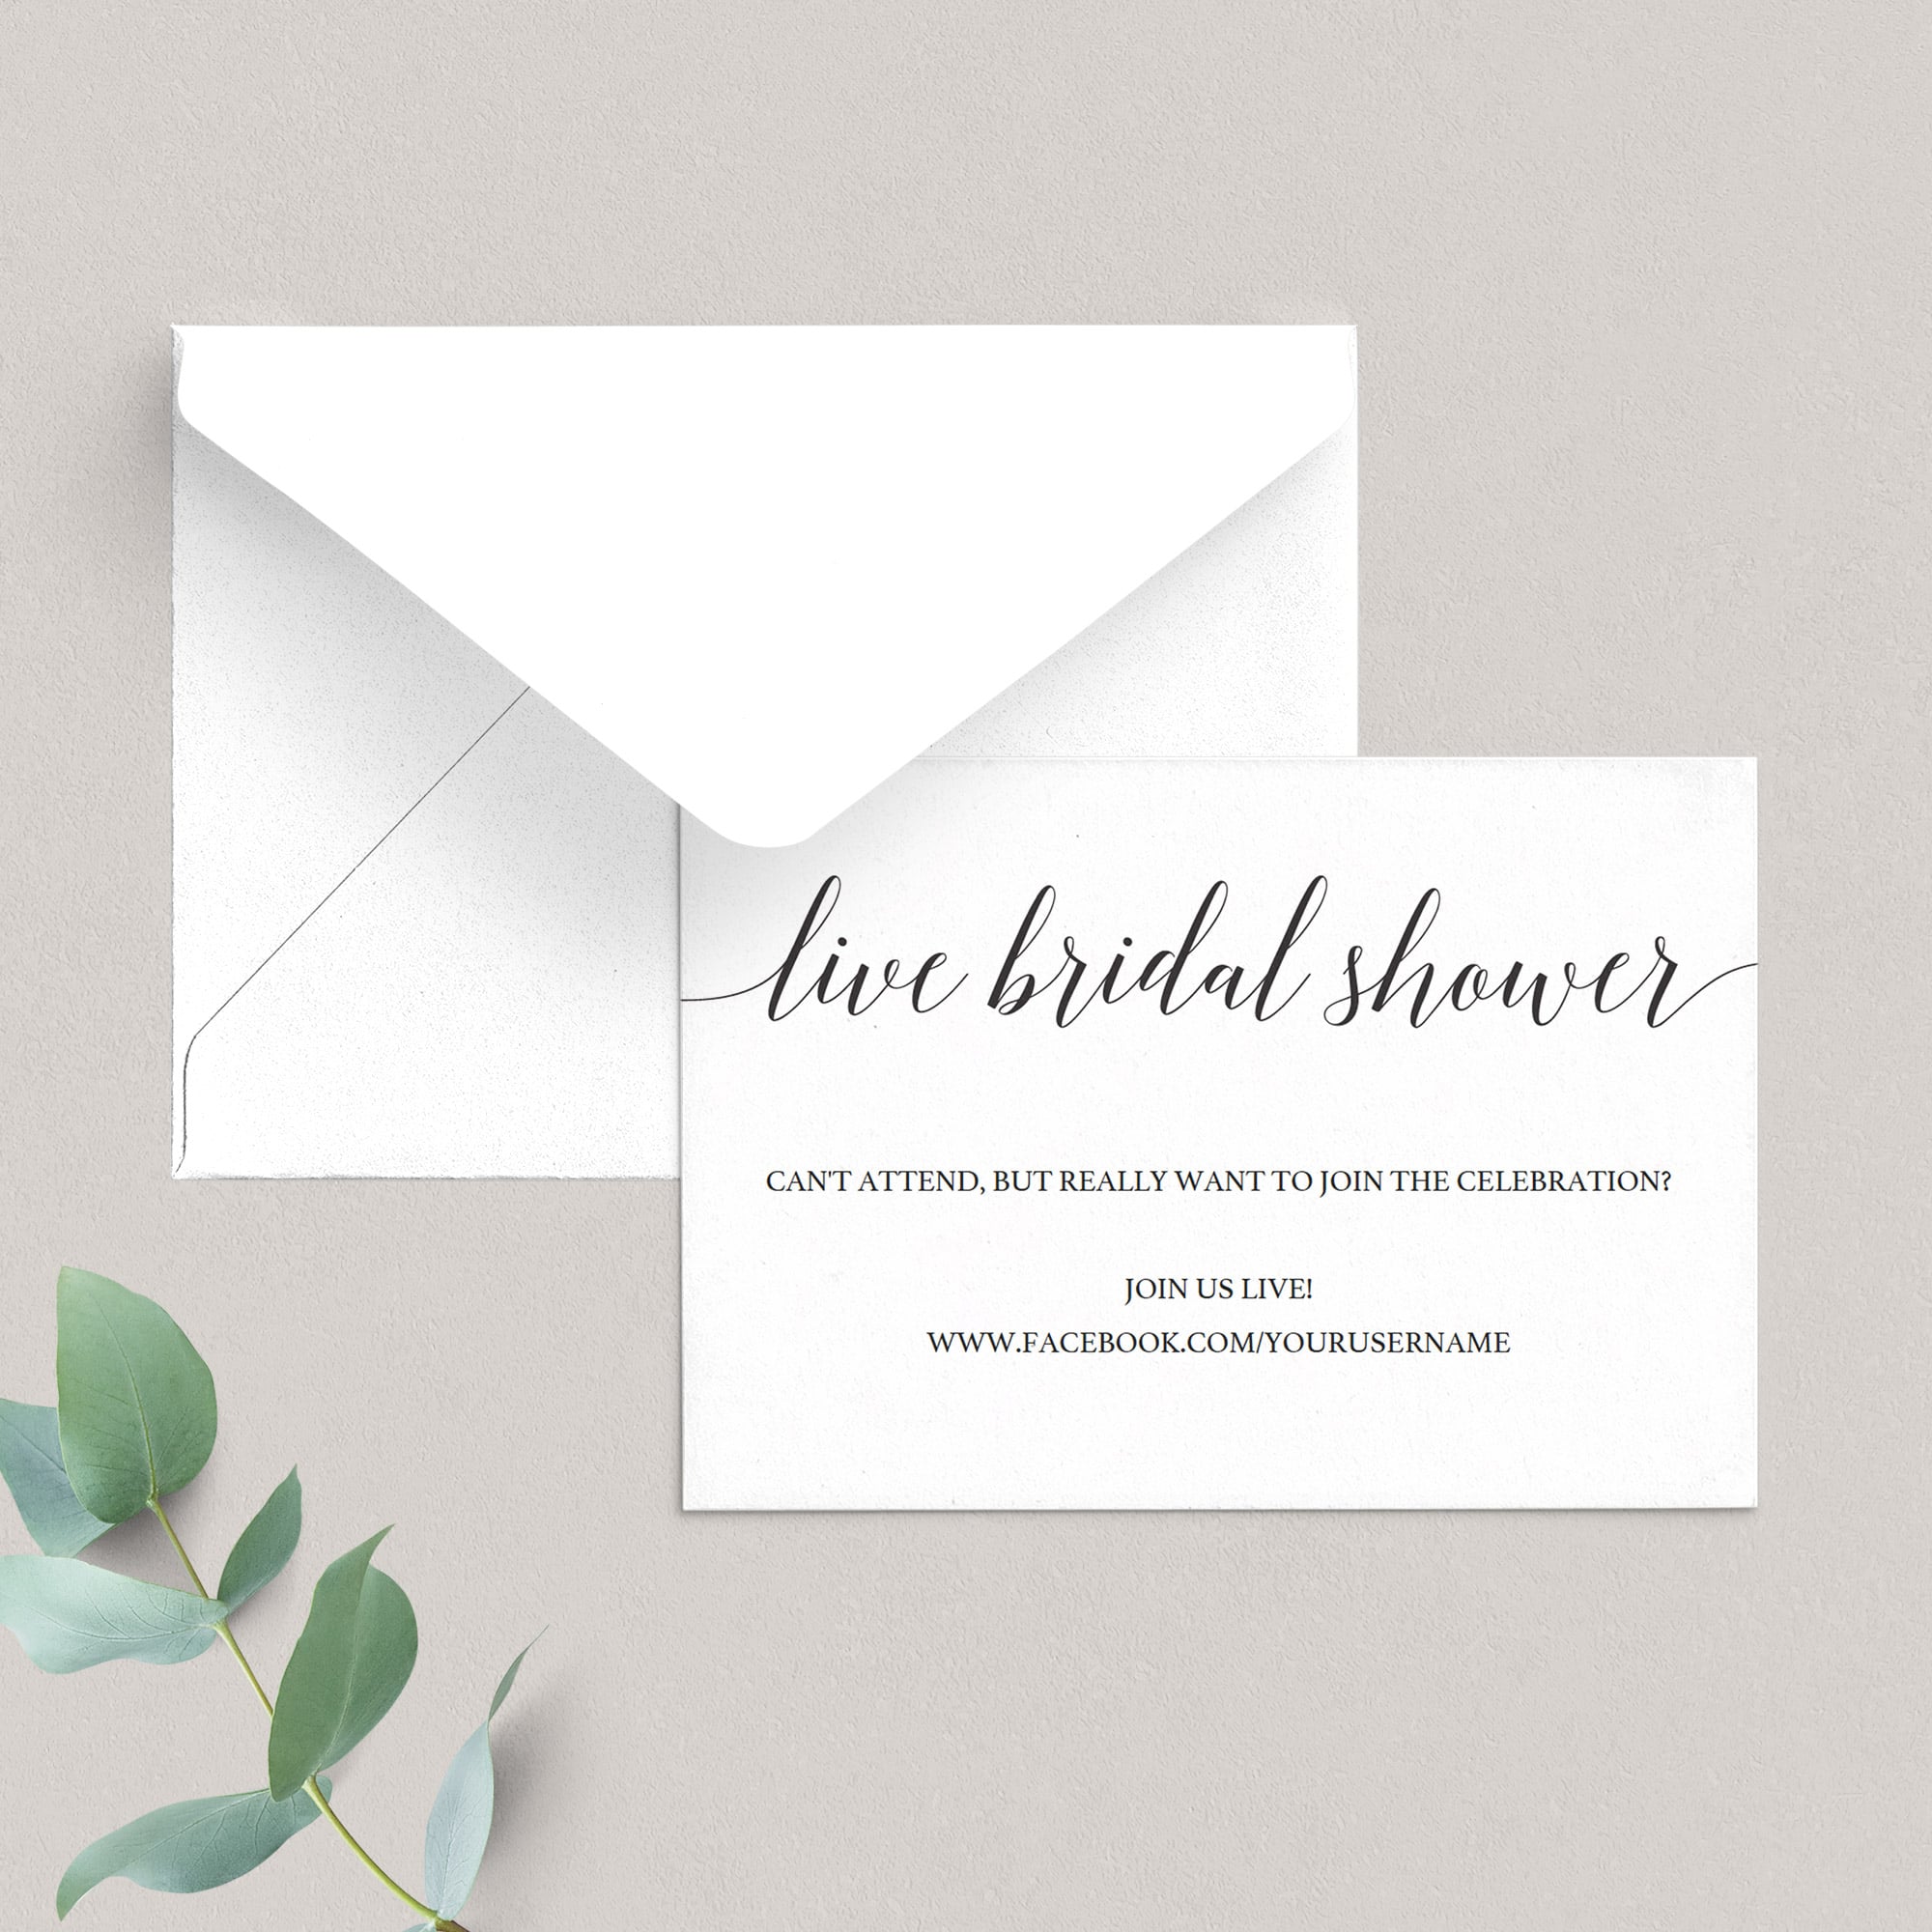 Virtual bridal shower insert card template by LittleSizzle